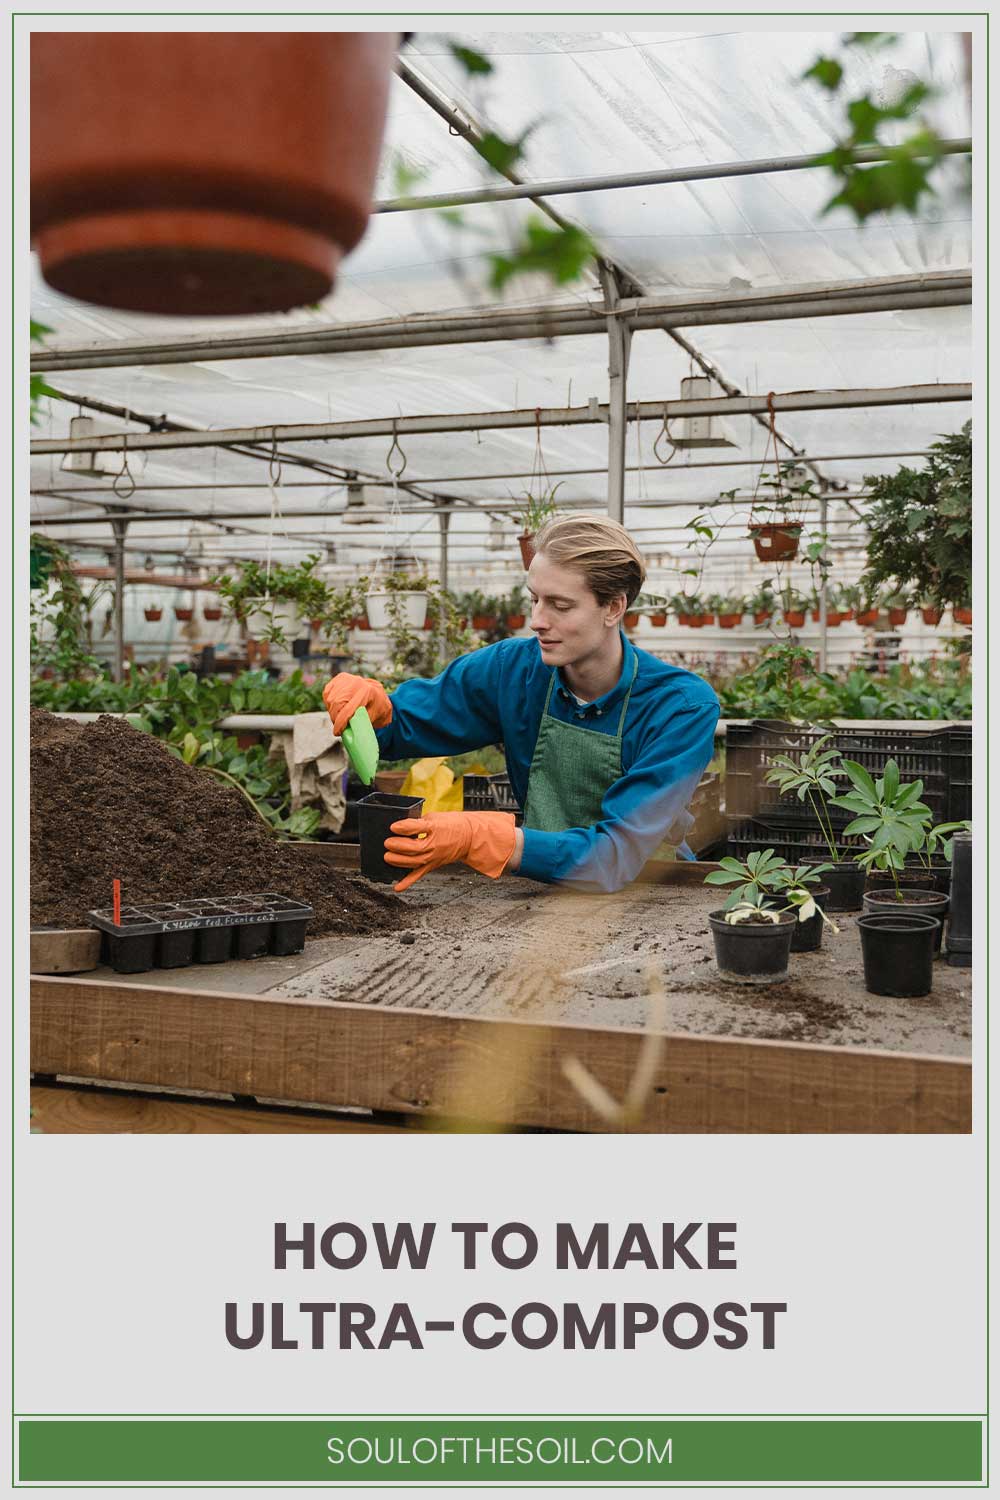 How to Make Ultra-Compost